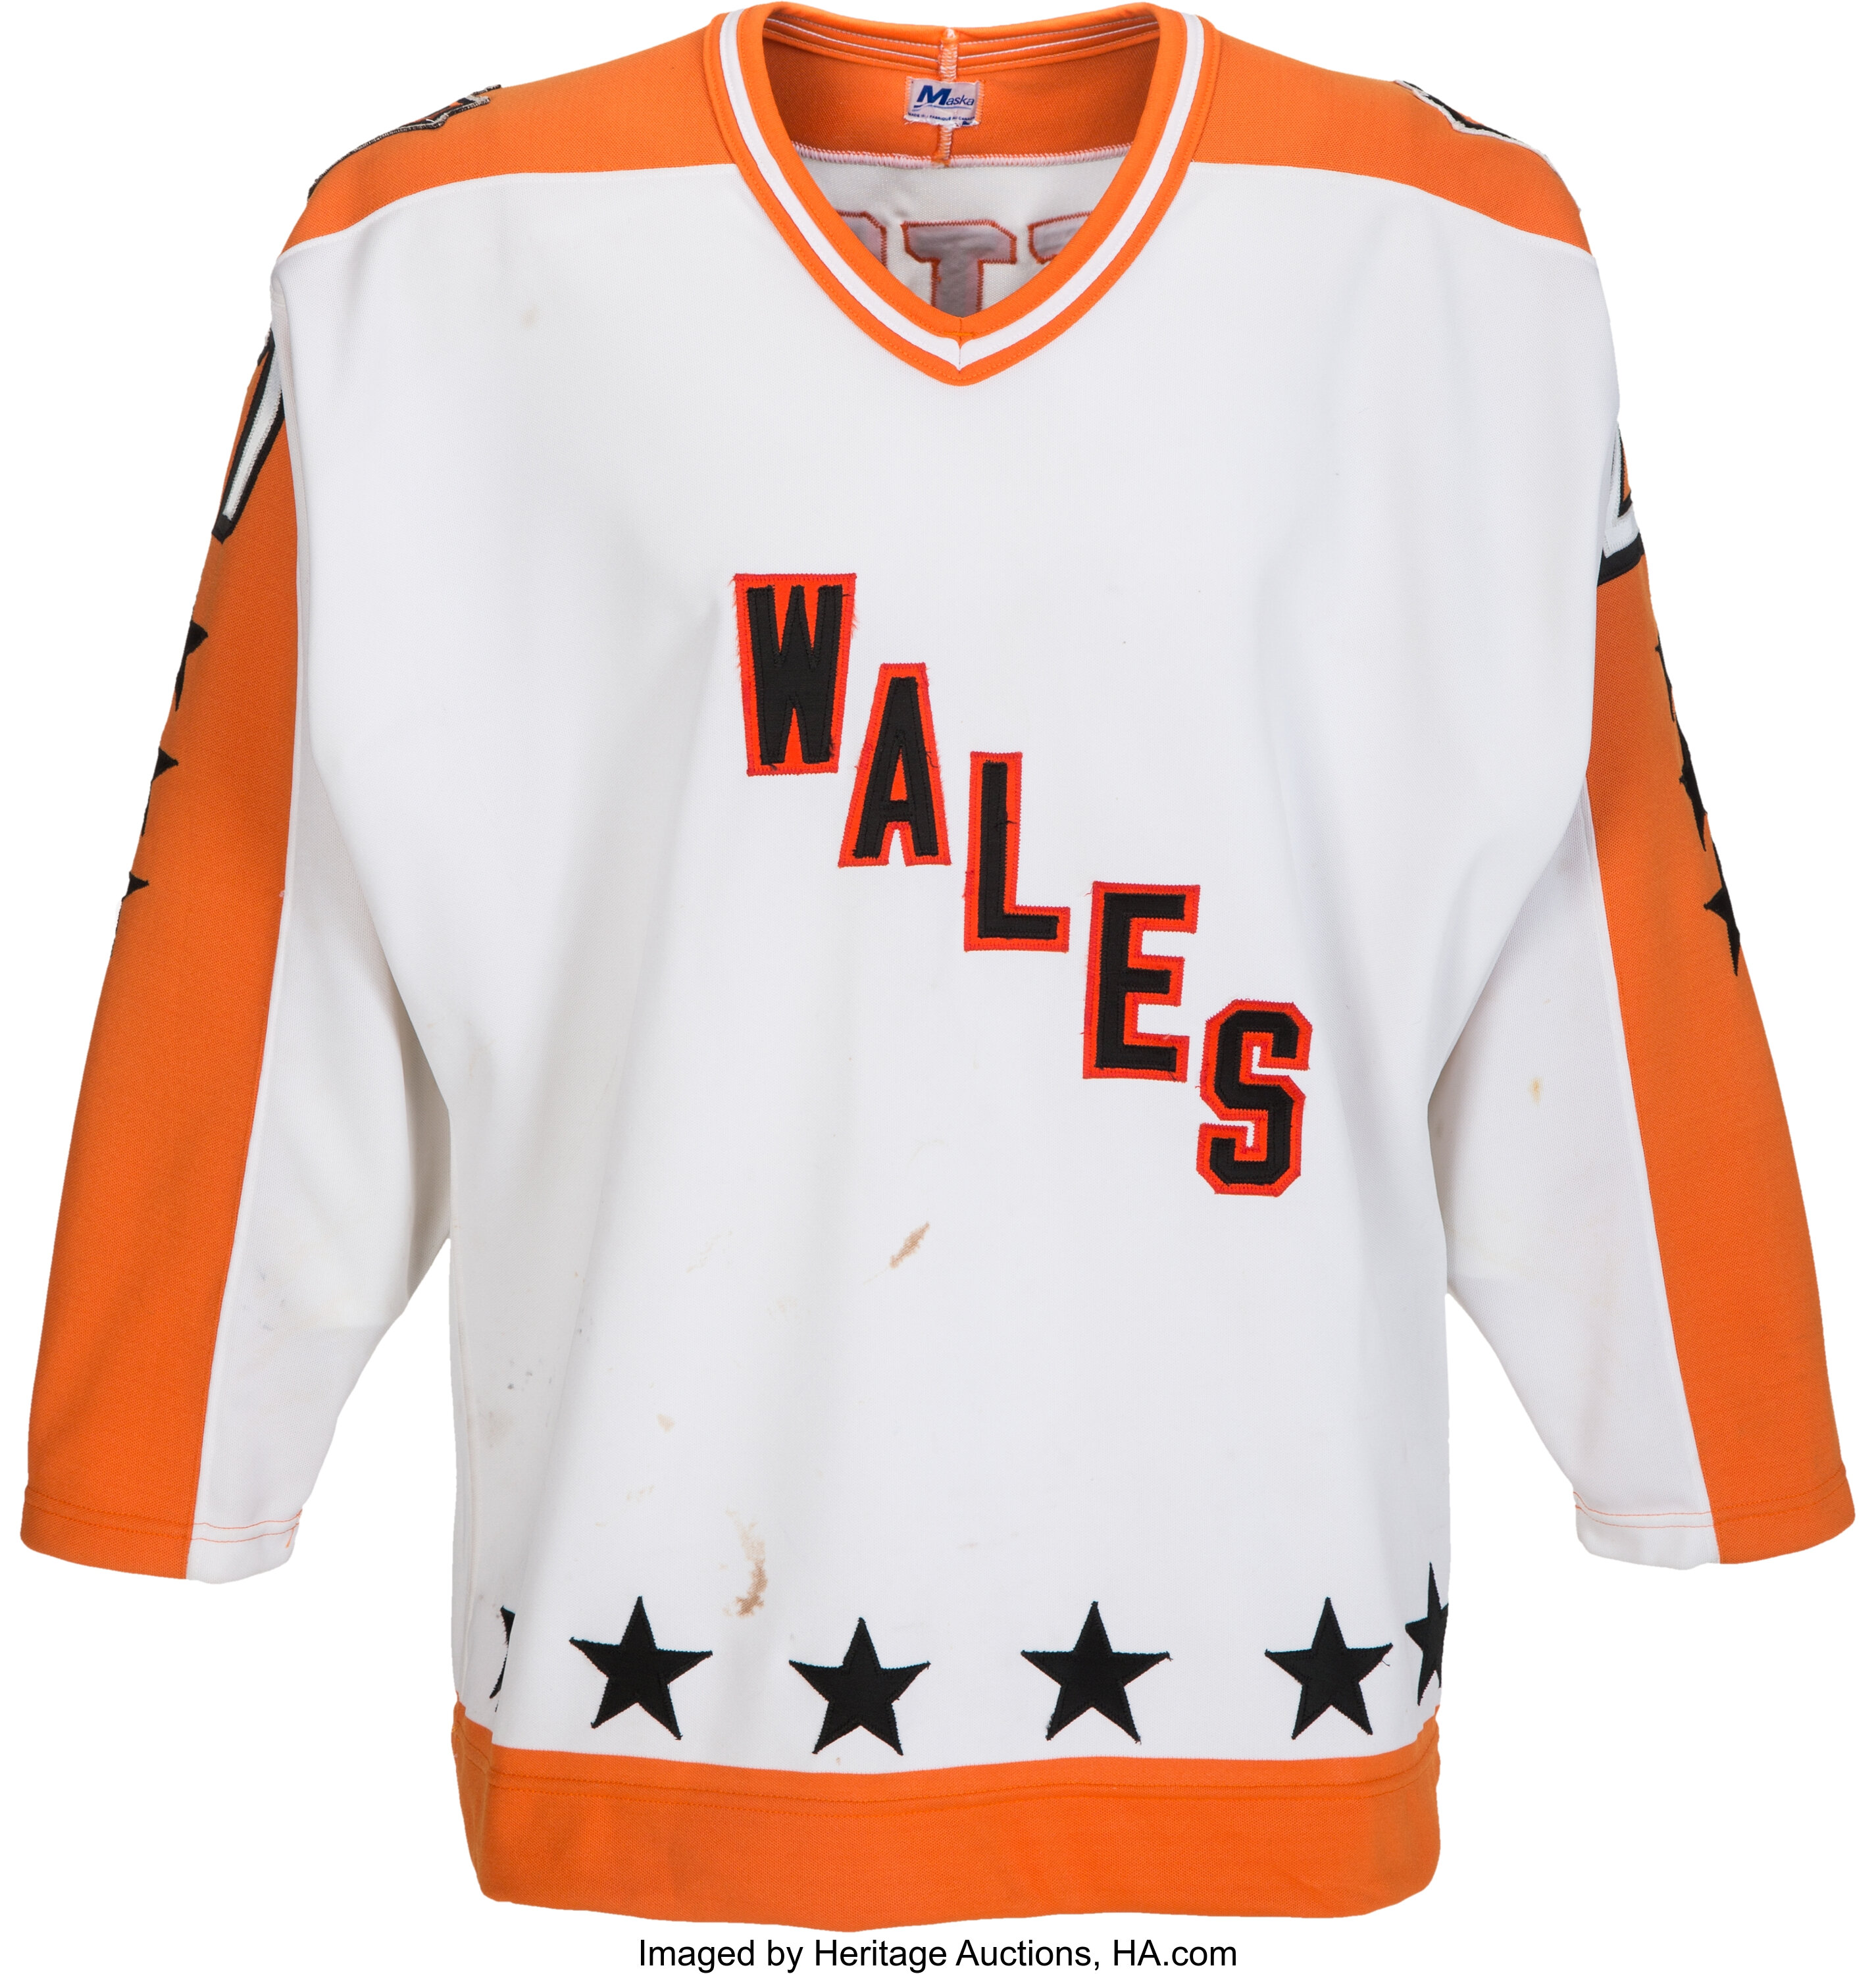 Where to buy NHL All Star jerseys, shirts and more online - masslive